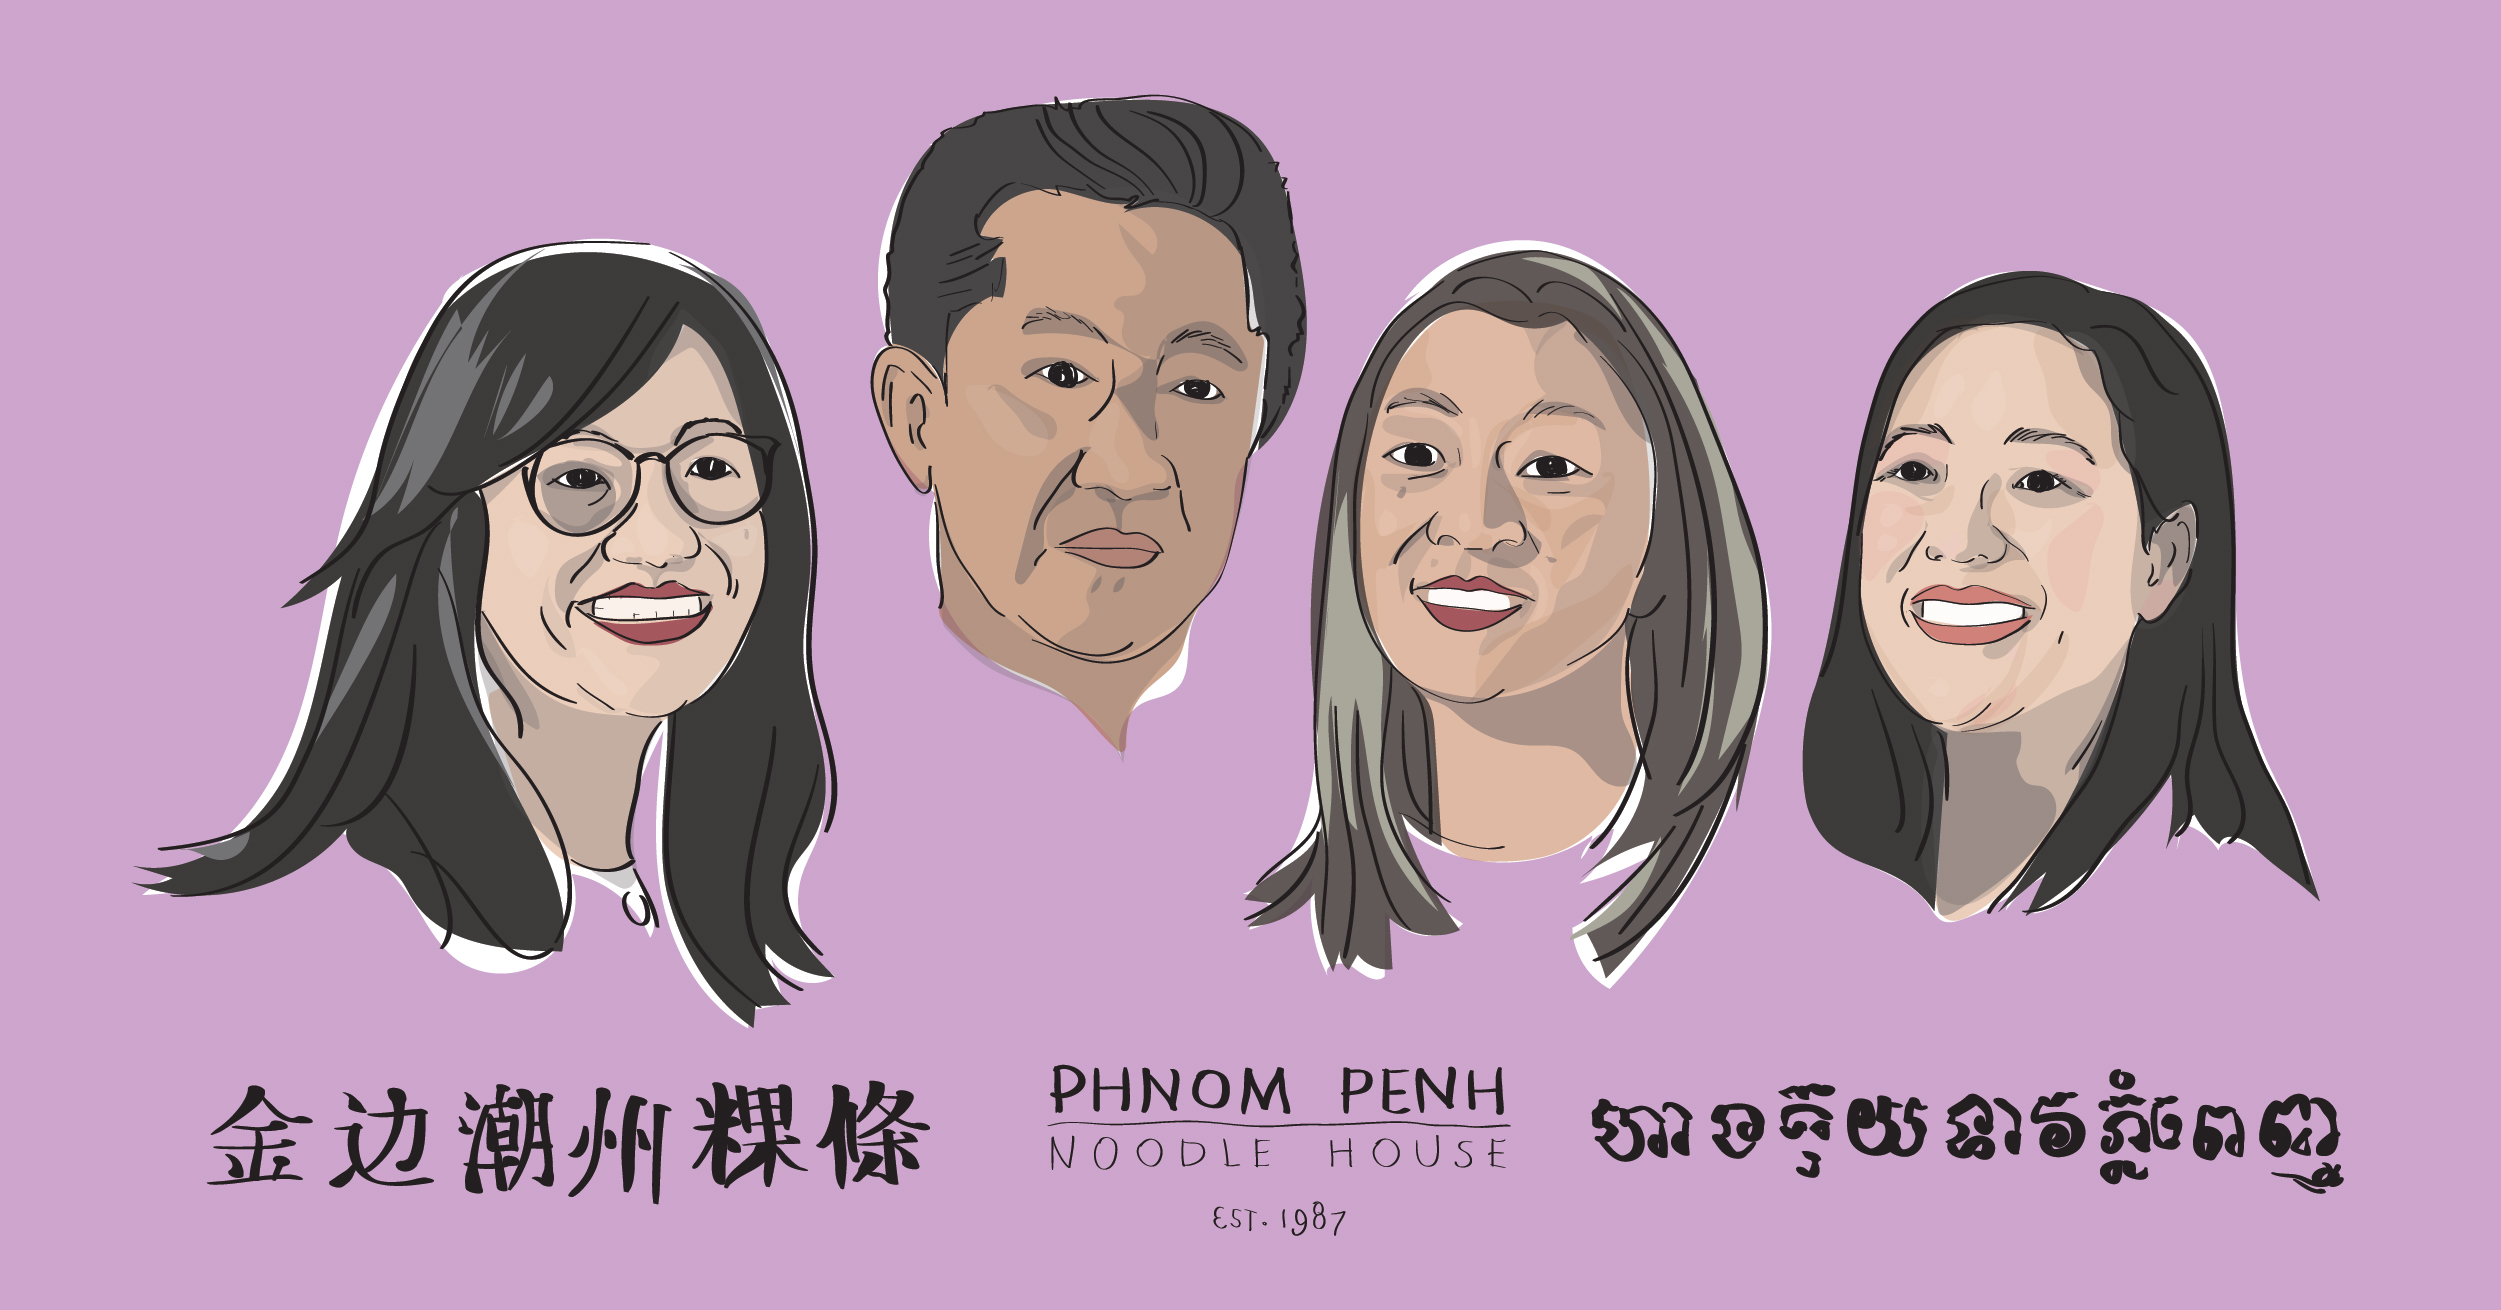 A purple background with illustrations of four faces of Cambodian descent- three females and one male